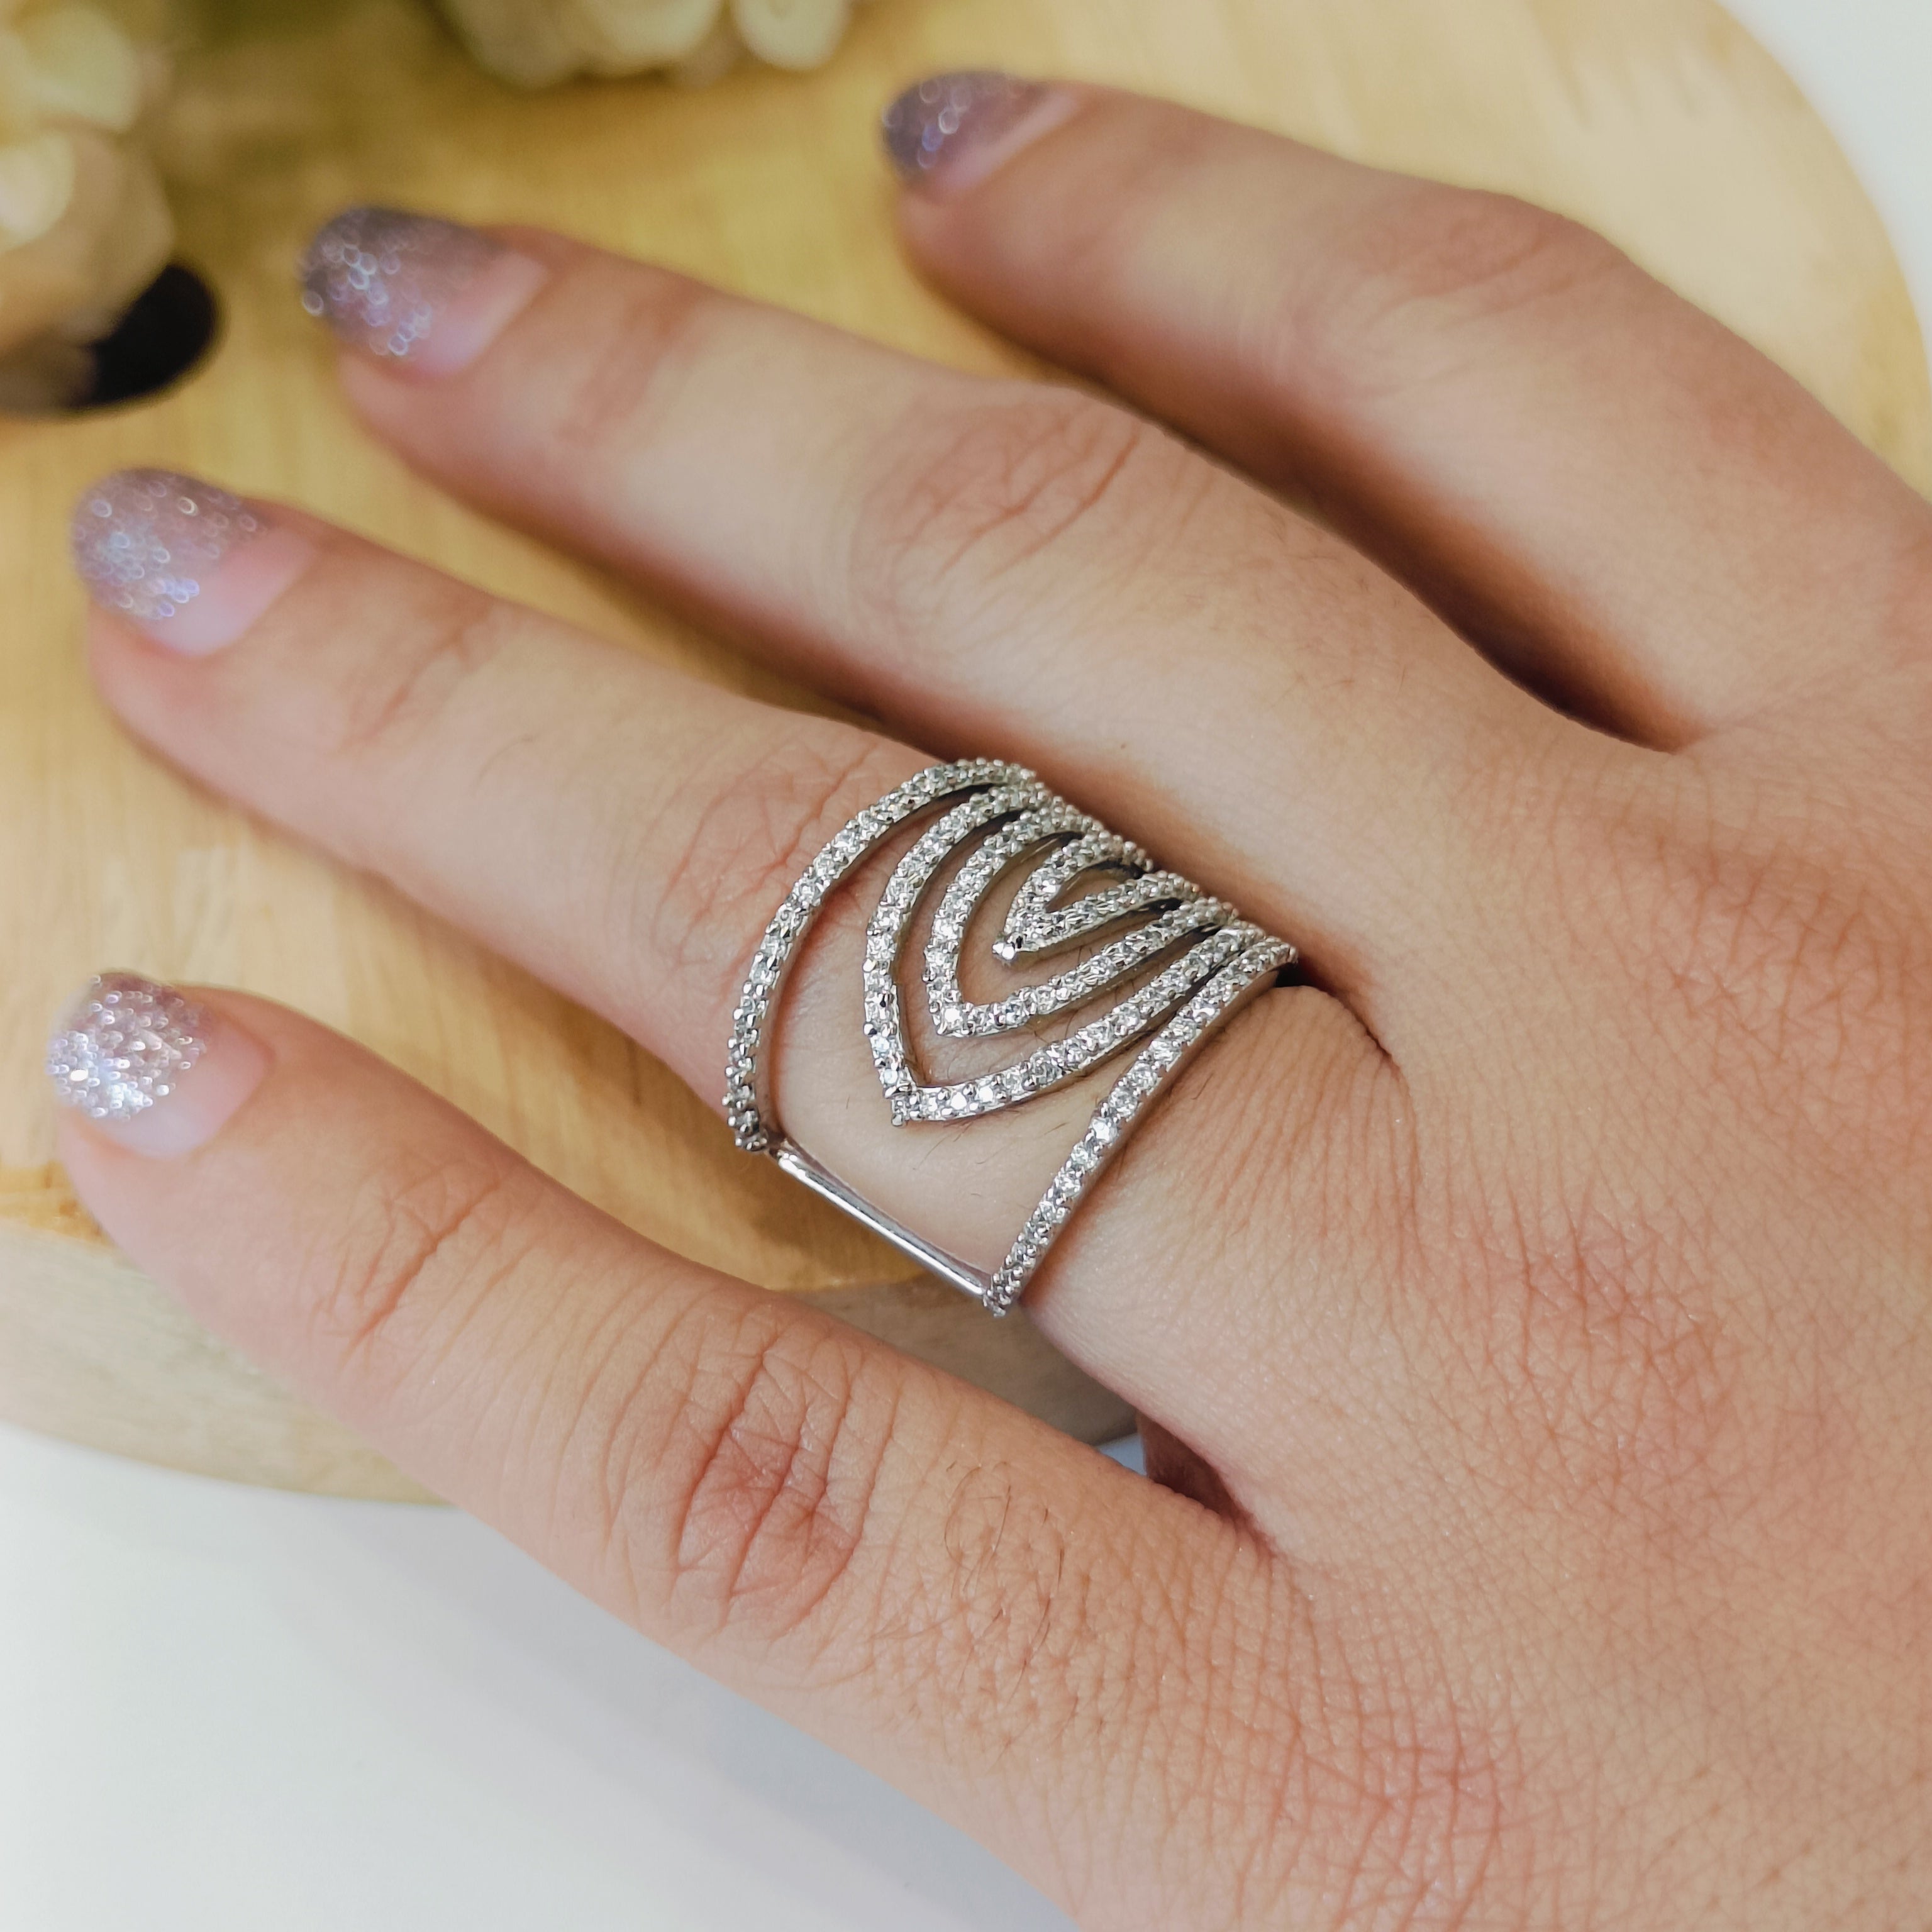 Vs sterling silver cocktail ring 178